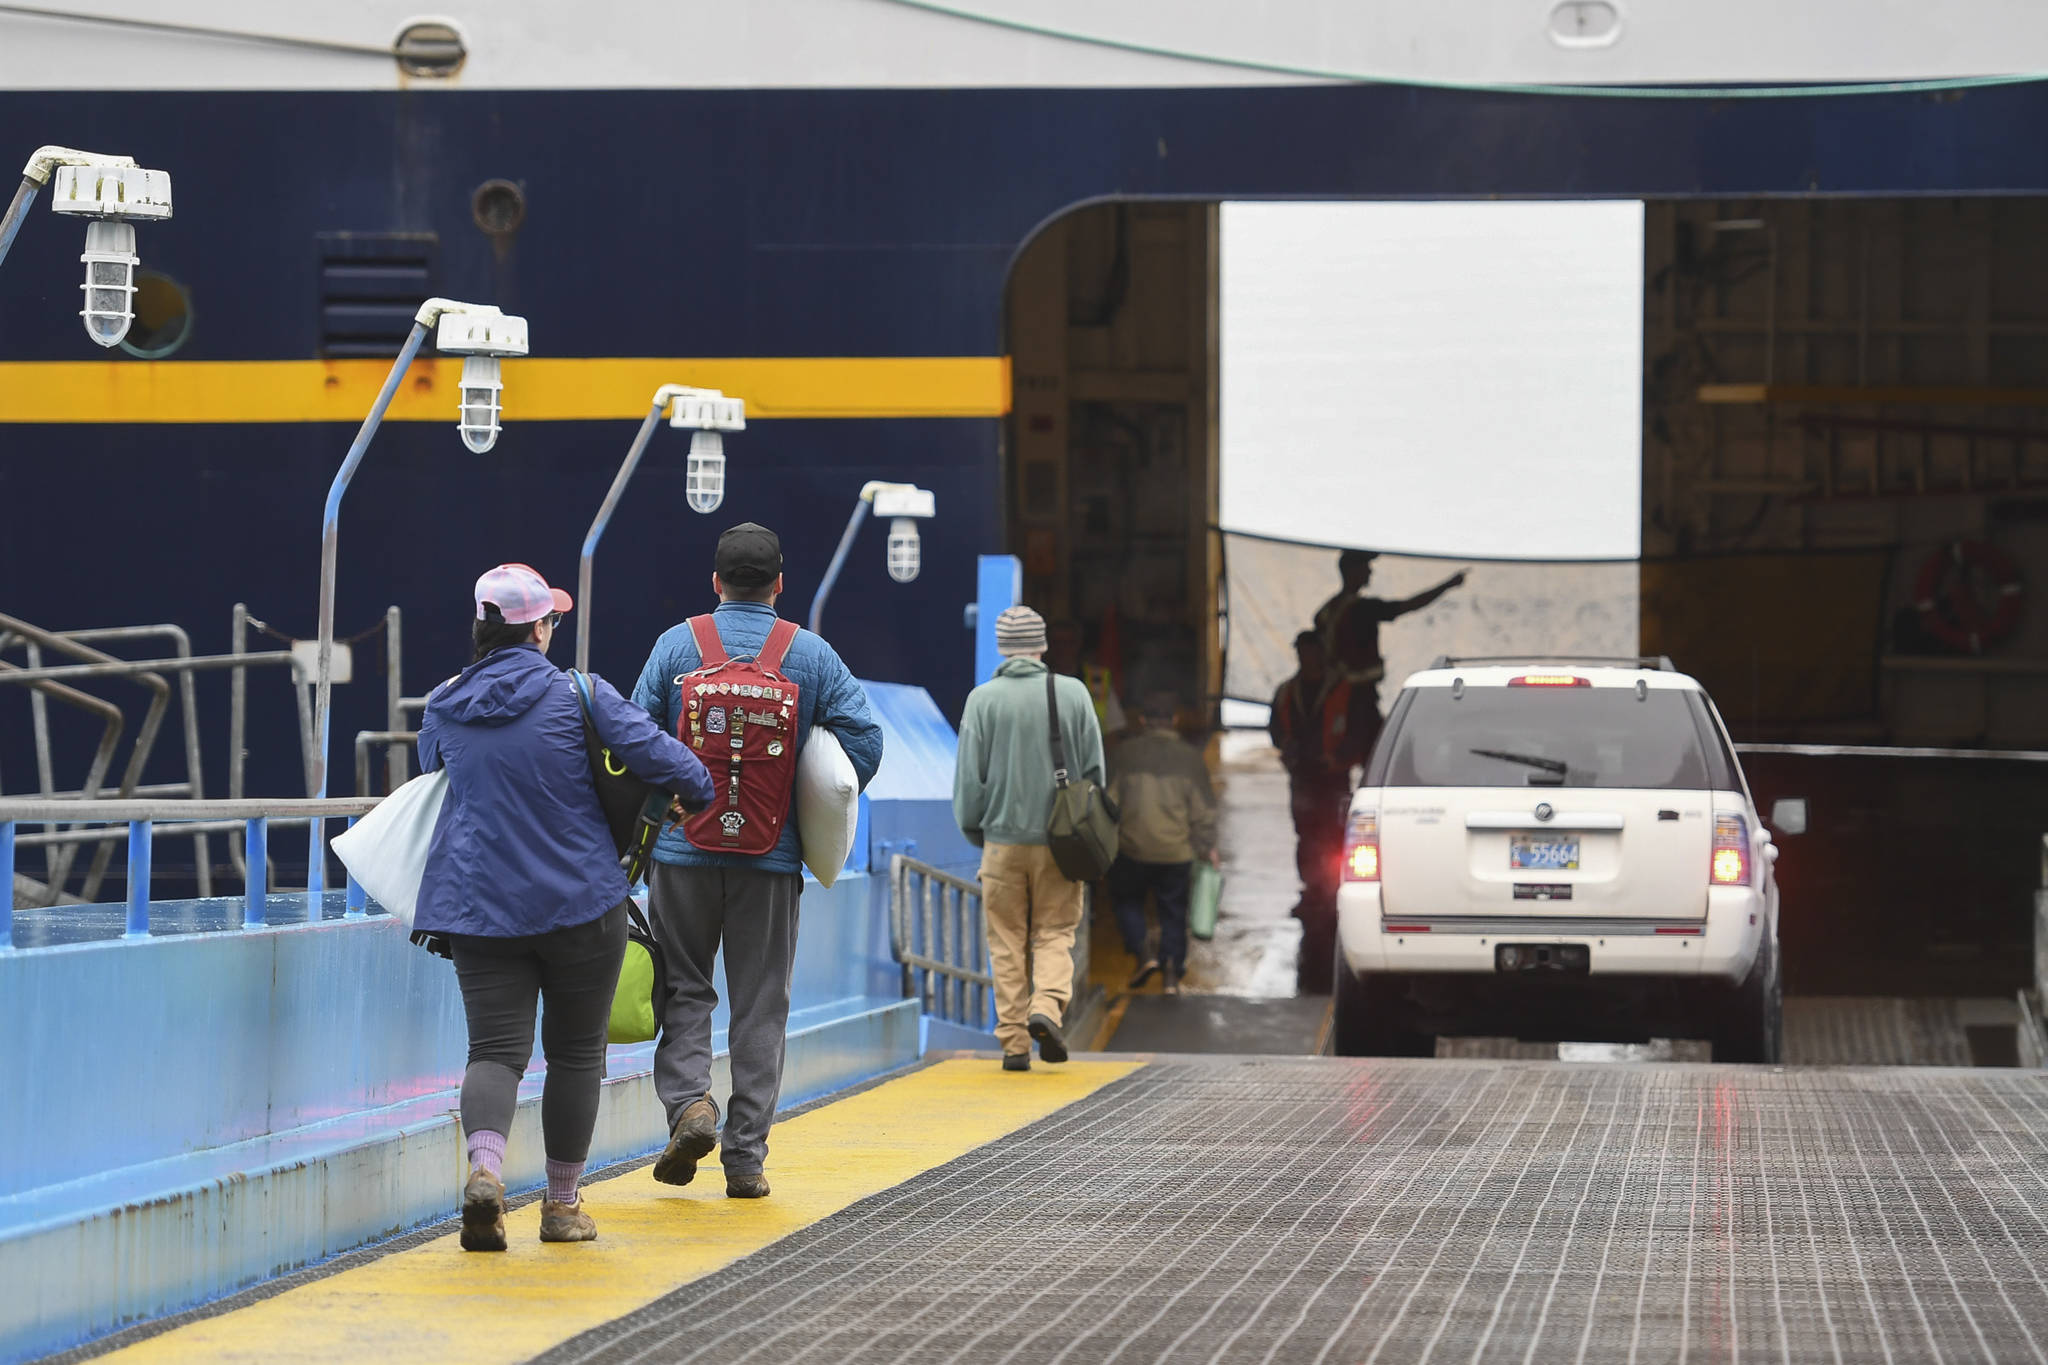 Walk-on passengers and vehicles load onto the LeConte ferry for a trip to Hoonah and Gustavus at the Alaska Marine Highway System’s Auke Bay Terminal on Friday, July 19, 2019. (Michael Penn | Juneau Empire file)